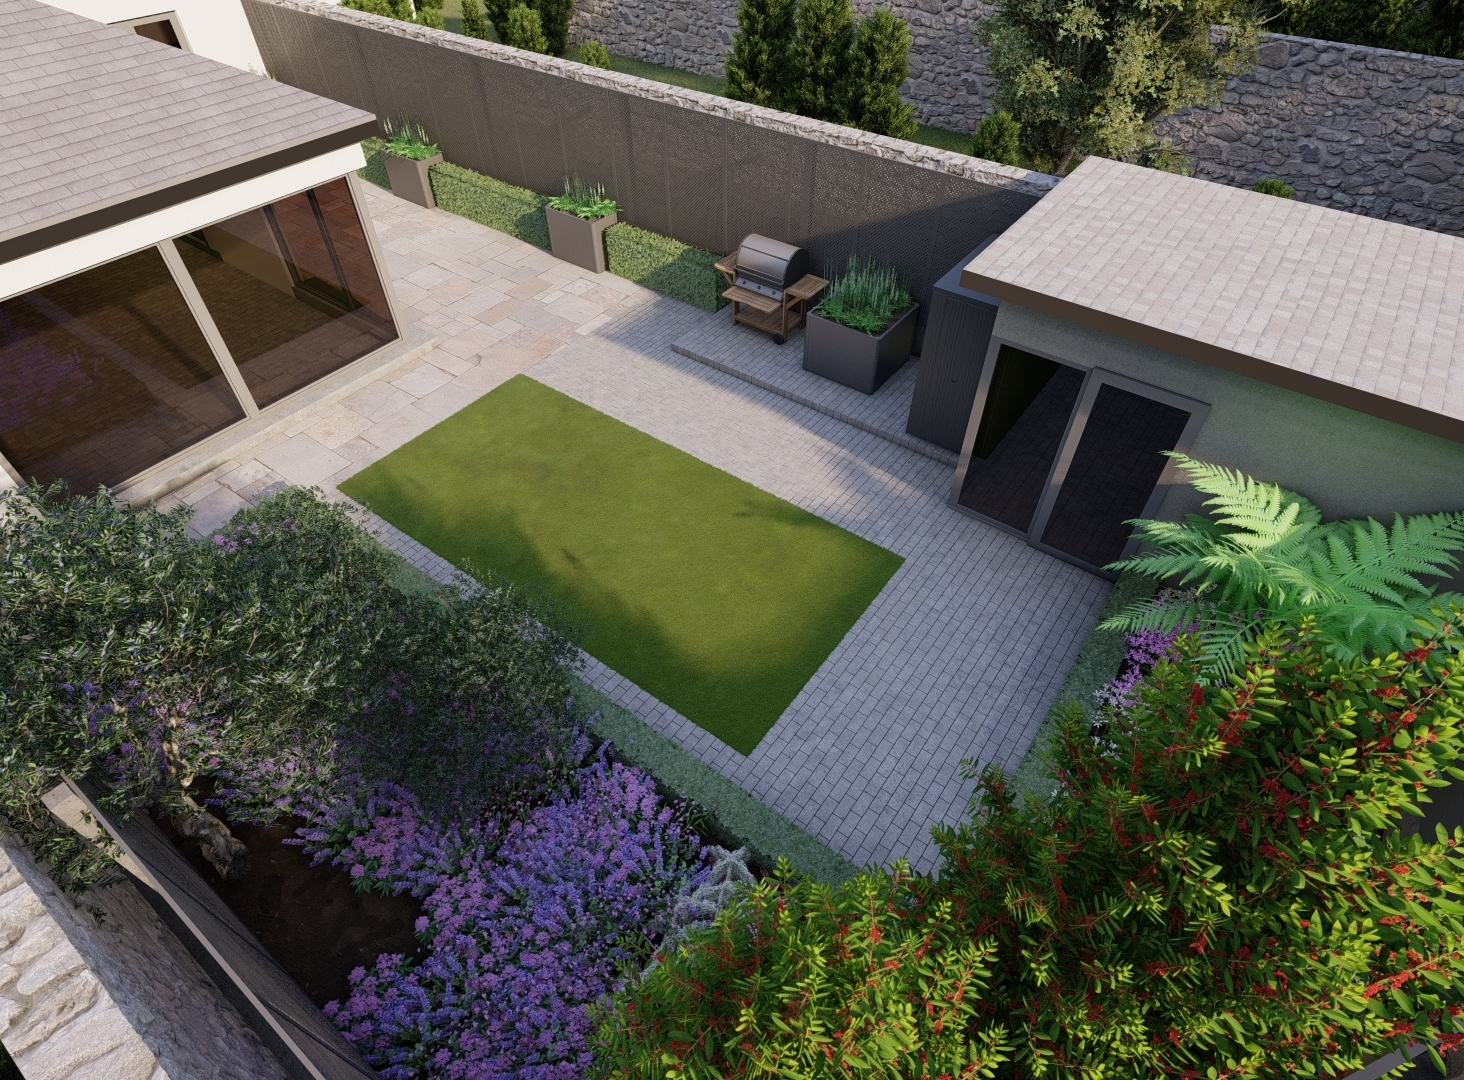 Design Visual for Terenure garden with outdoor BBQ and entertaining area, featuring bespoke fencing, specimen trees and lush planting.